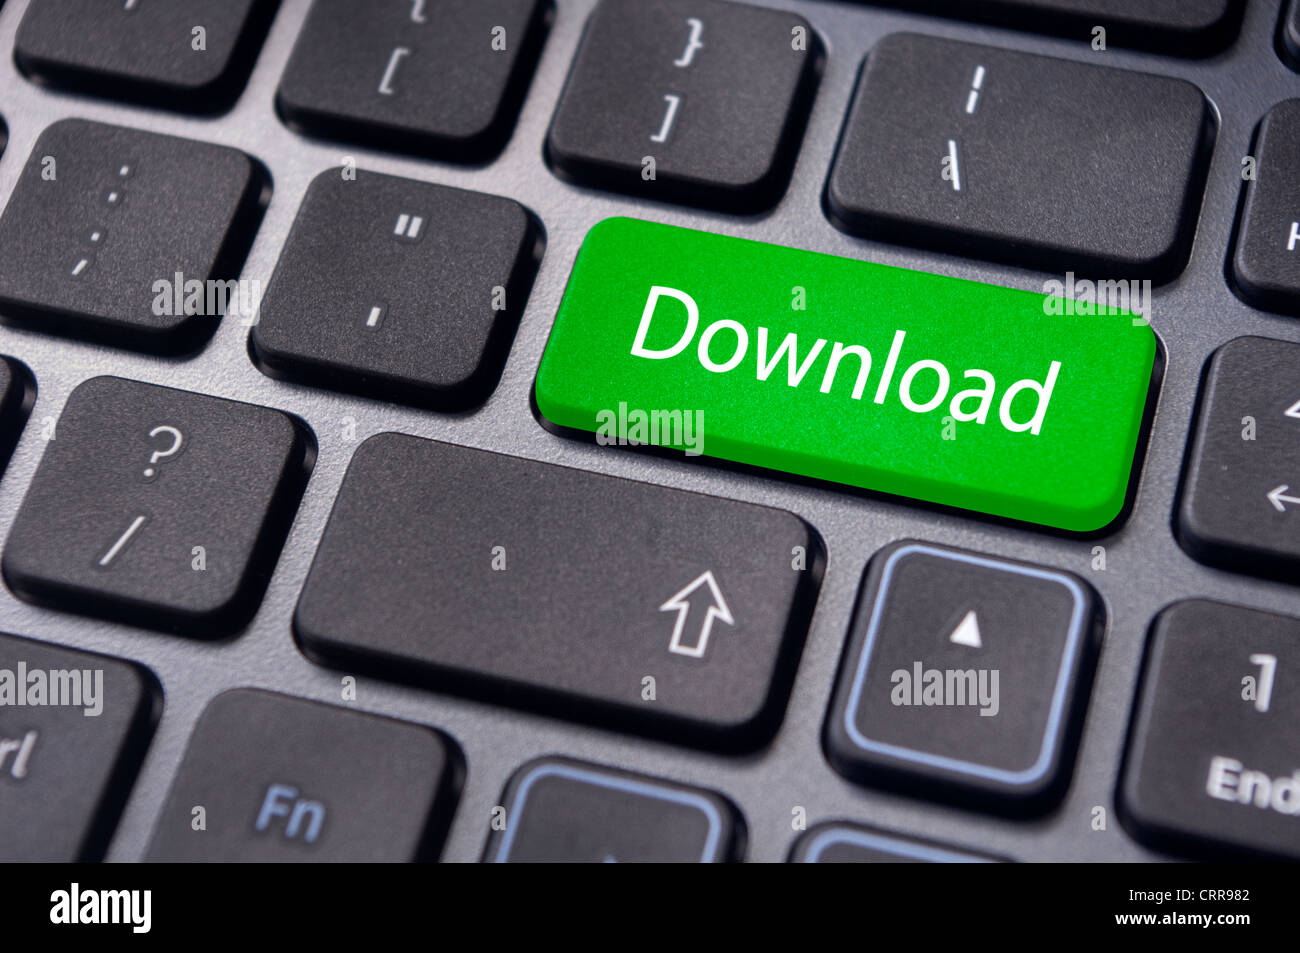 download concepts, to transfer data from internet. Stock Photo